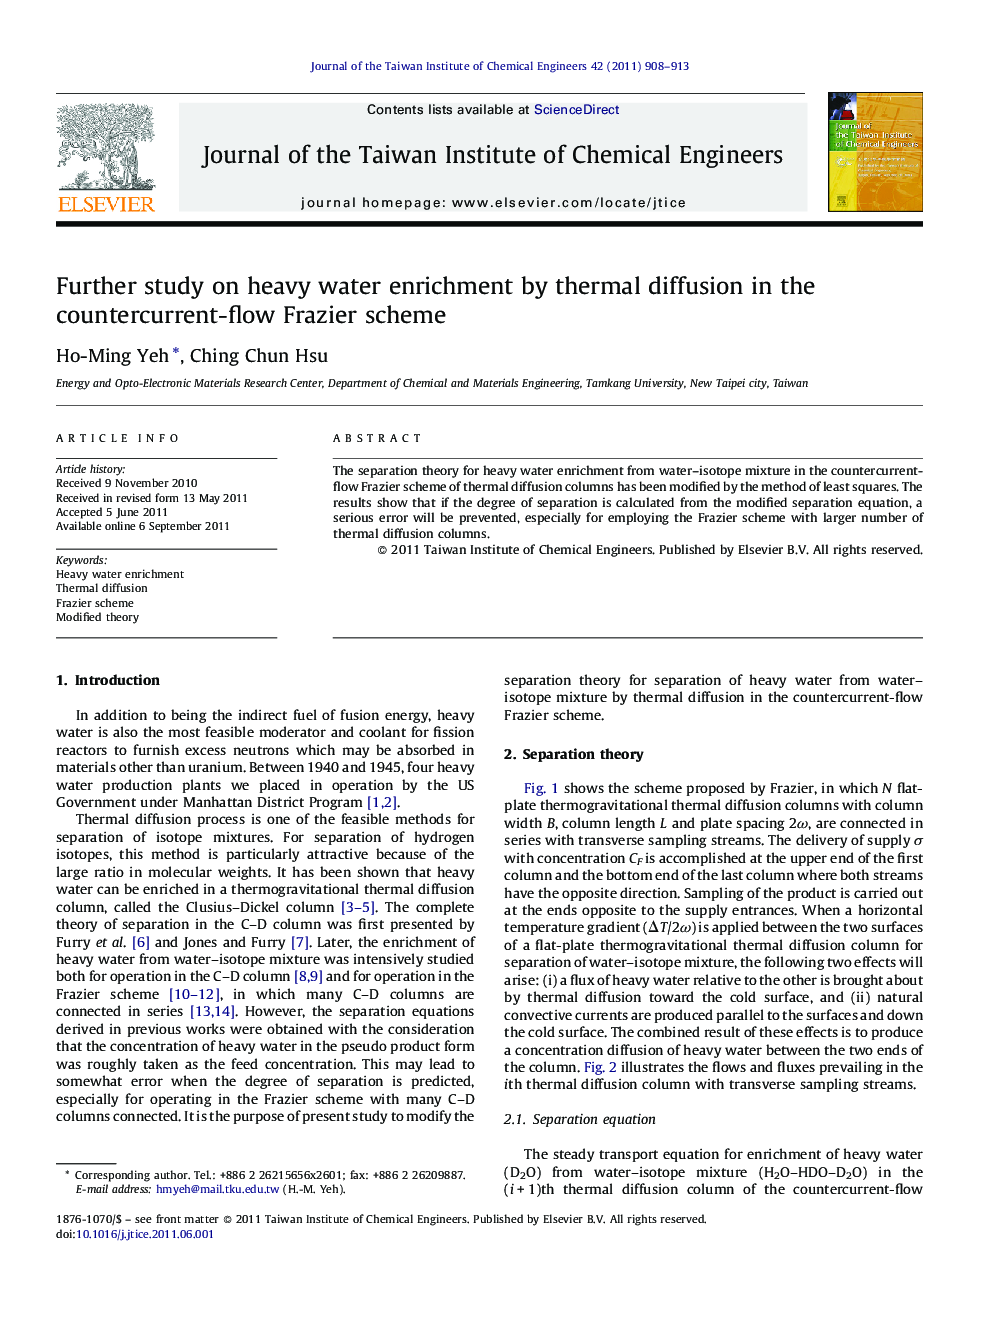 Further study on heavy water enrichment by thermal diffusion in the countercurrent-flow Frazier scheme